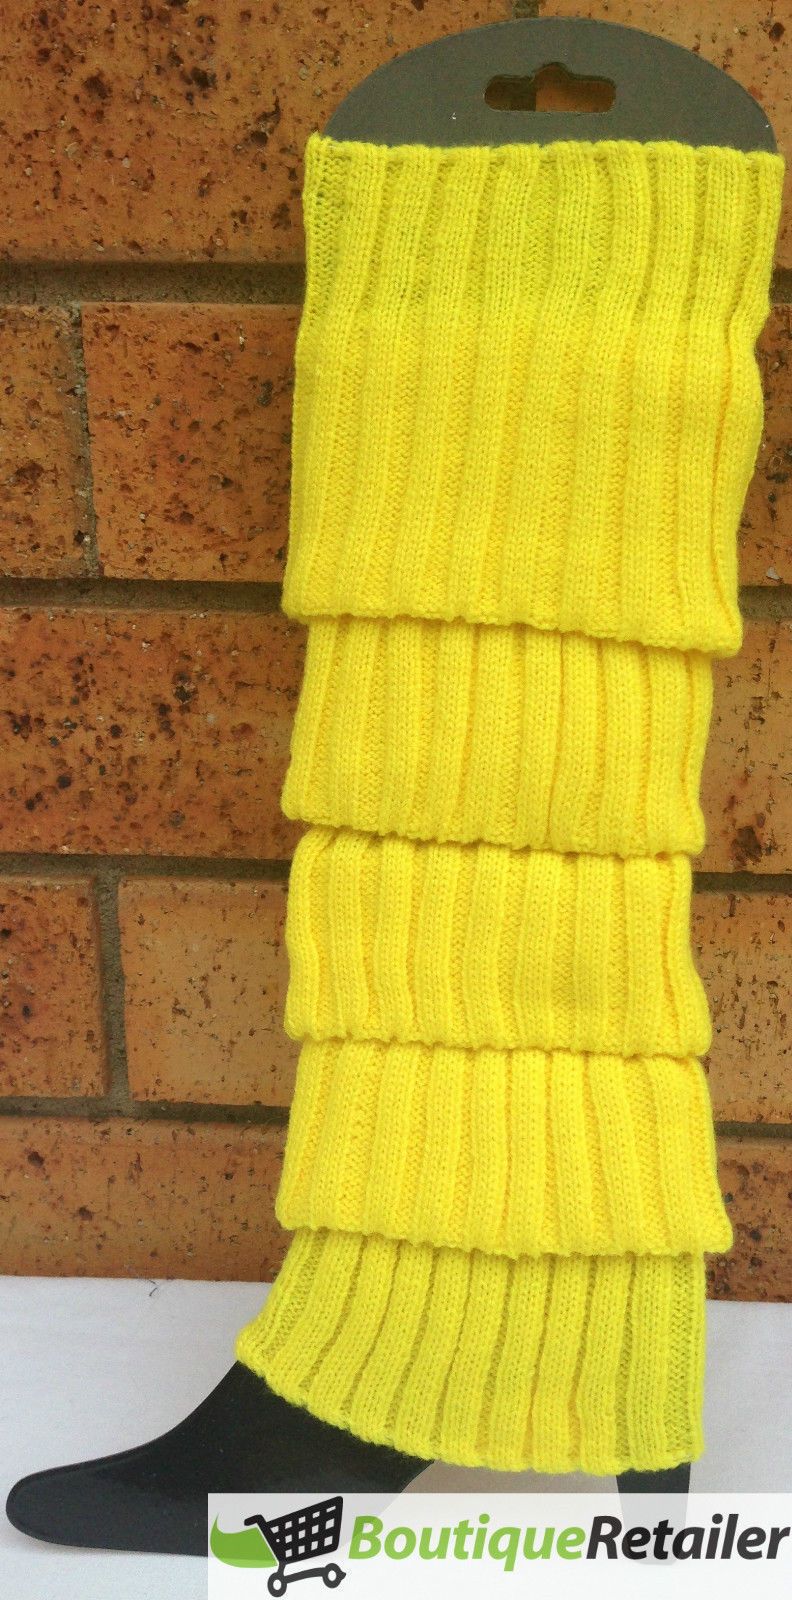 12x LEG WARMERS Knitted Womens Costume Neon Dance Party Knit 80s BULK New Payday Deals